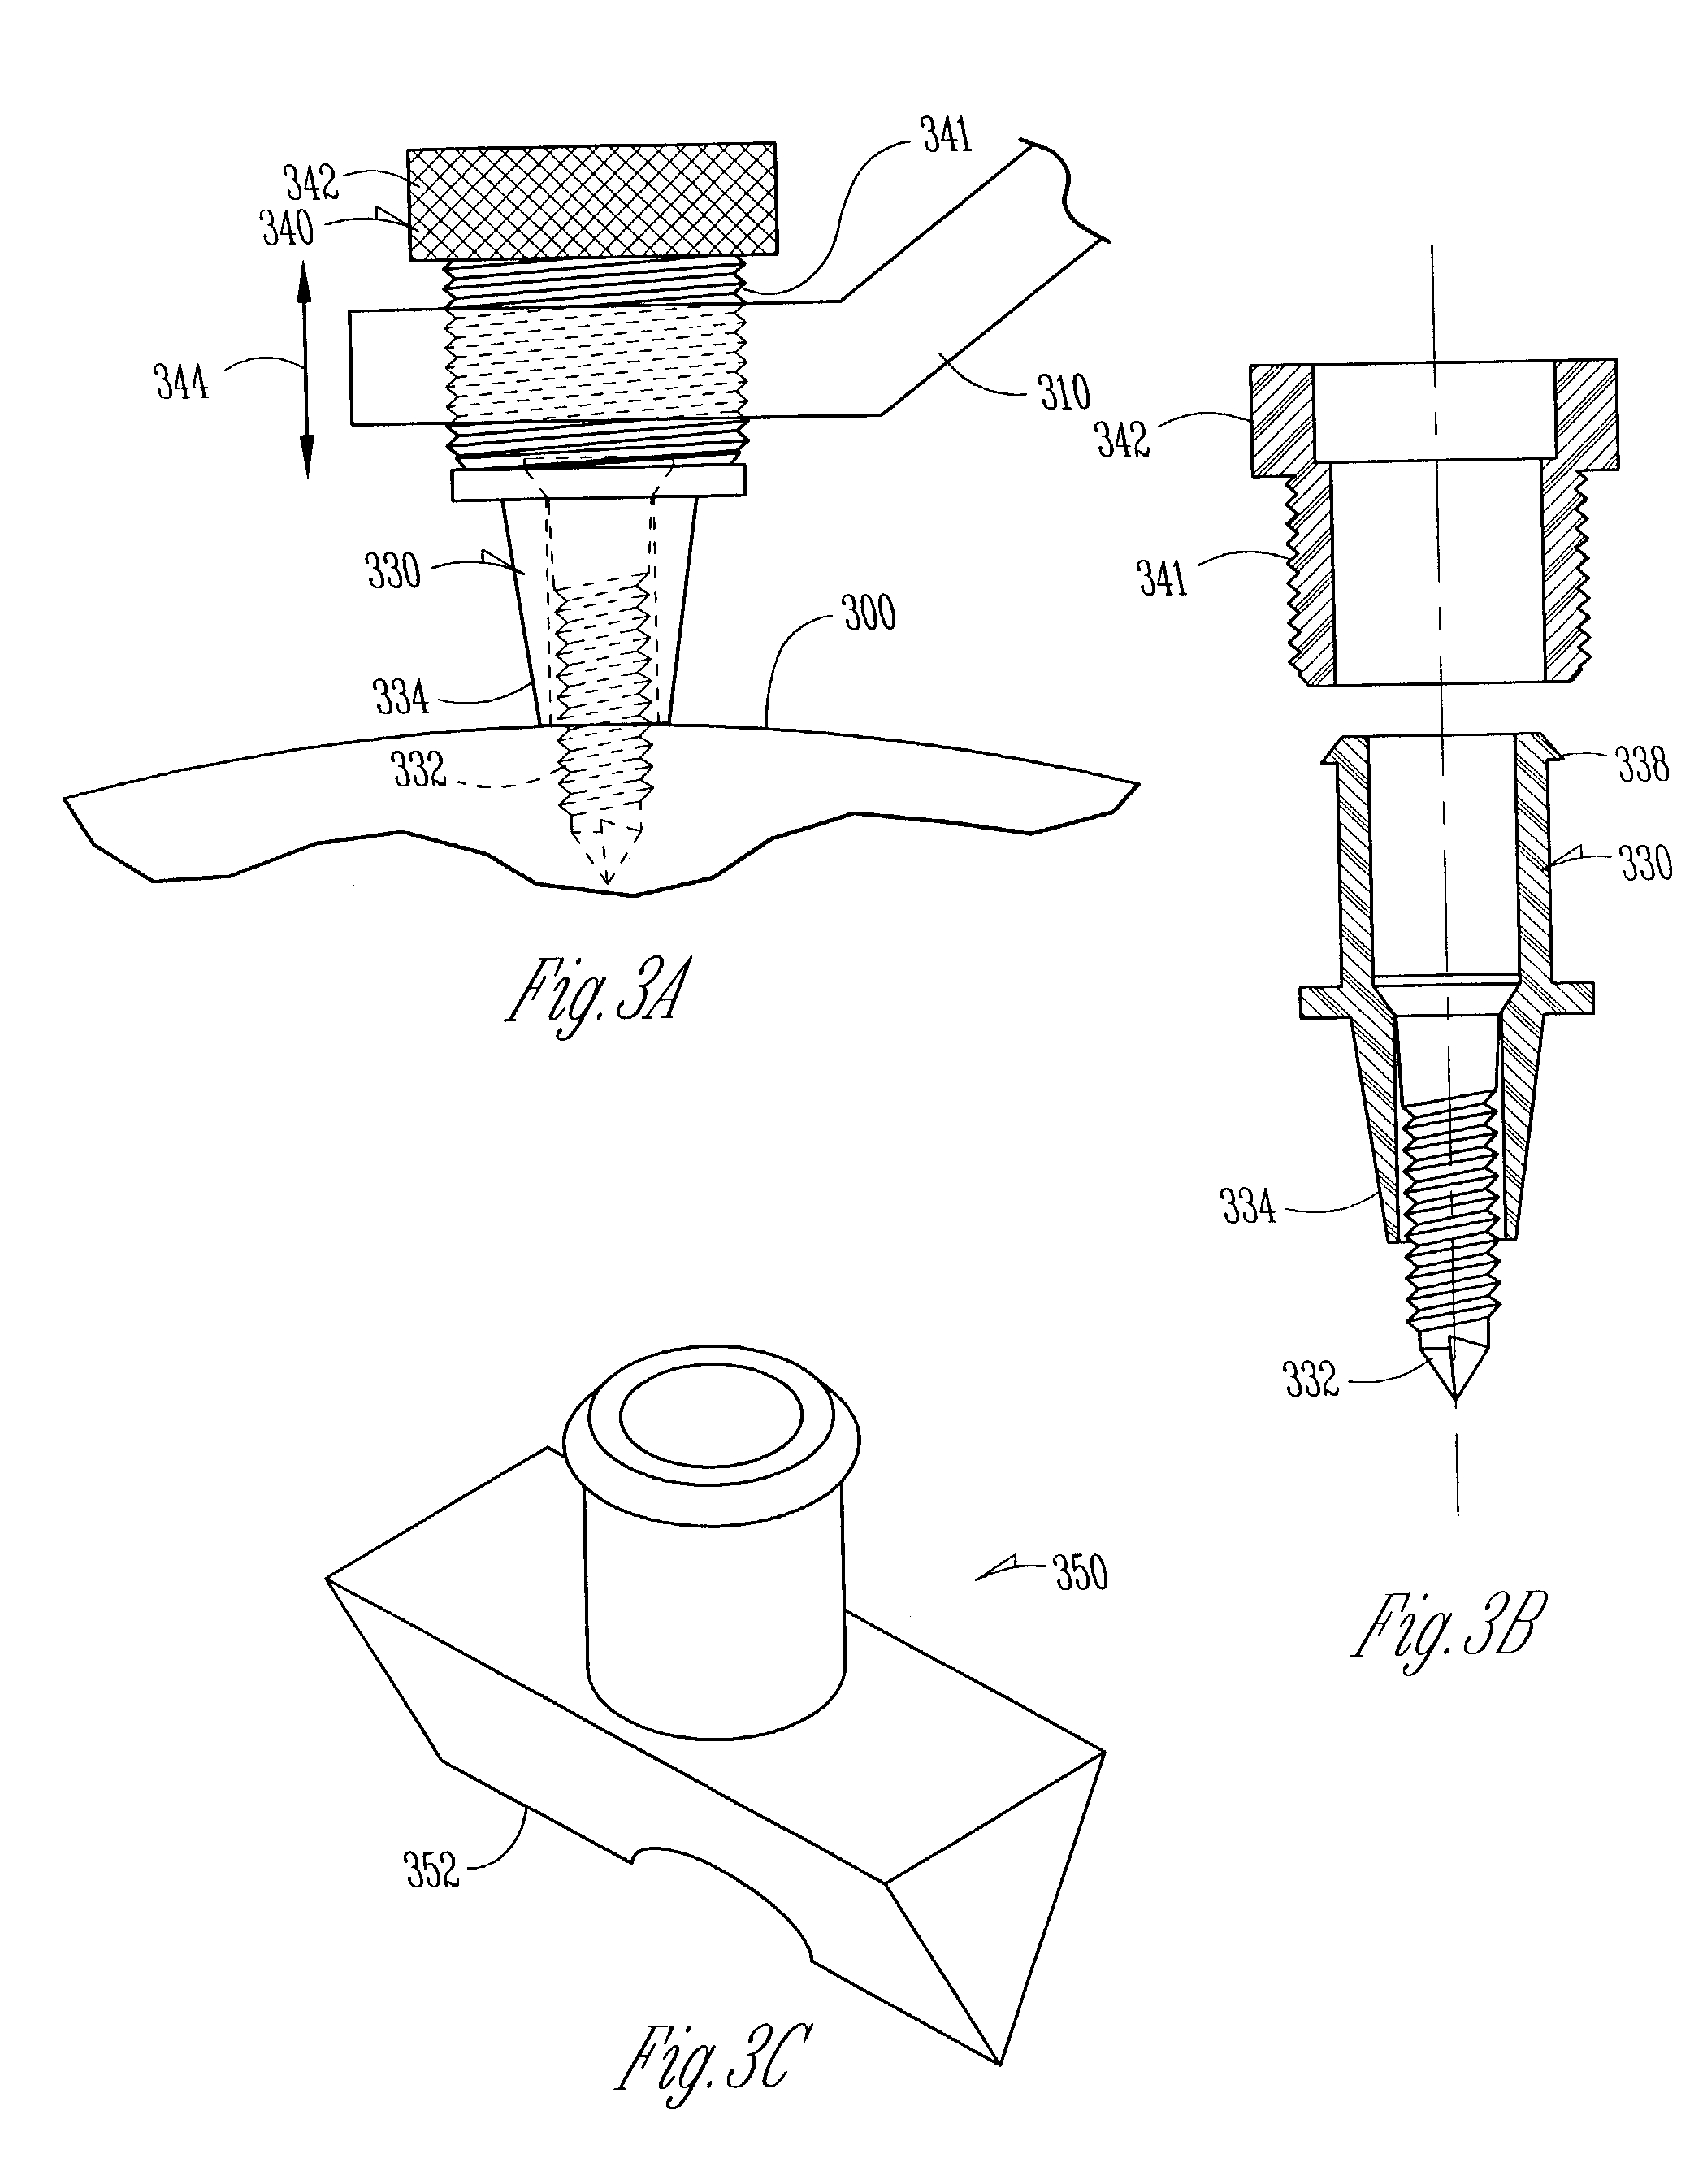 Organ access device and method